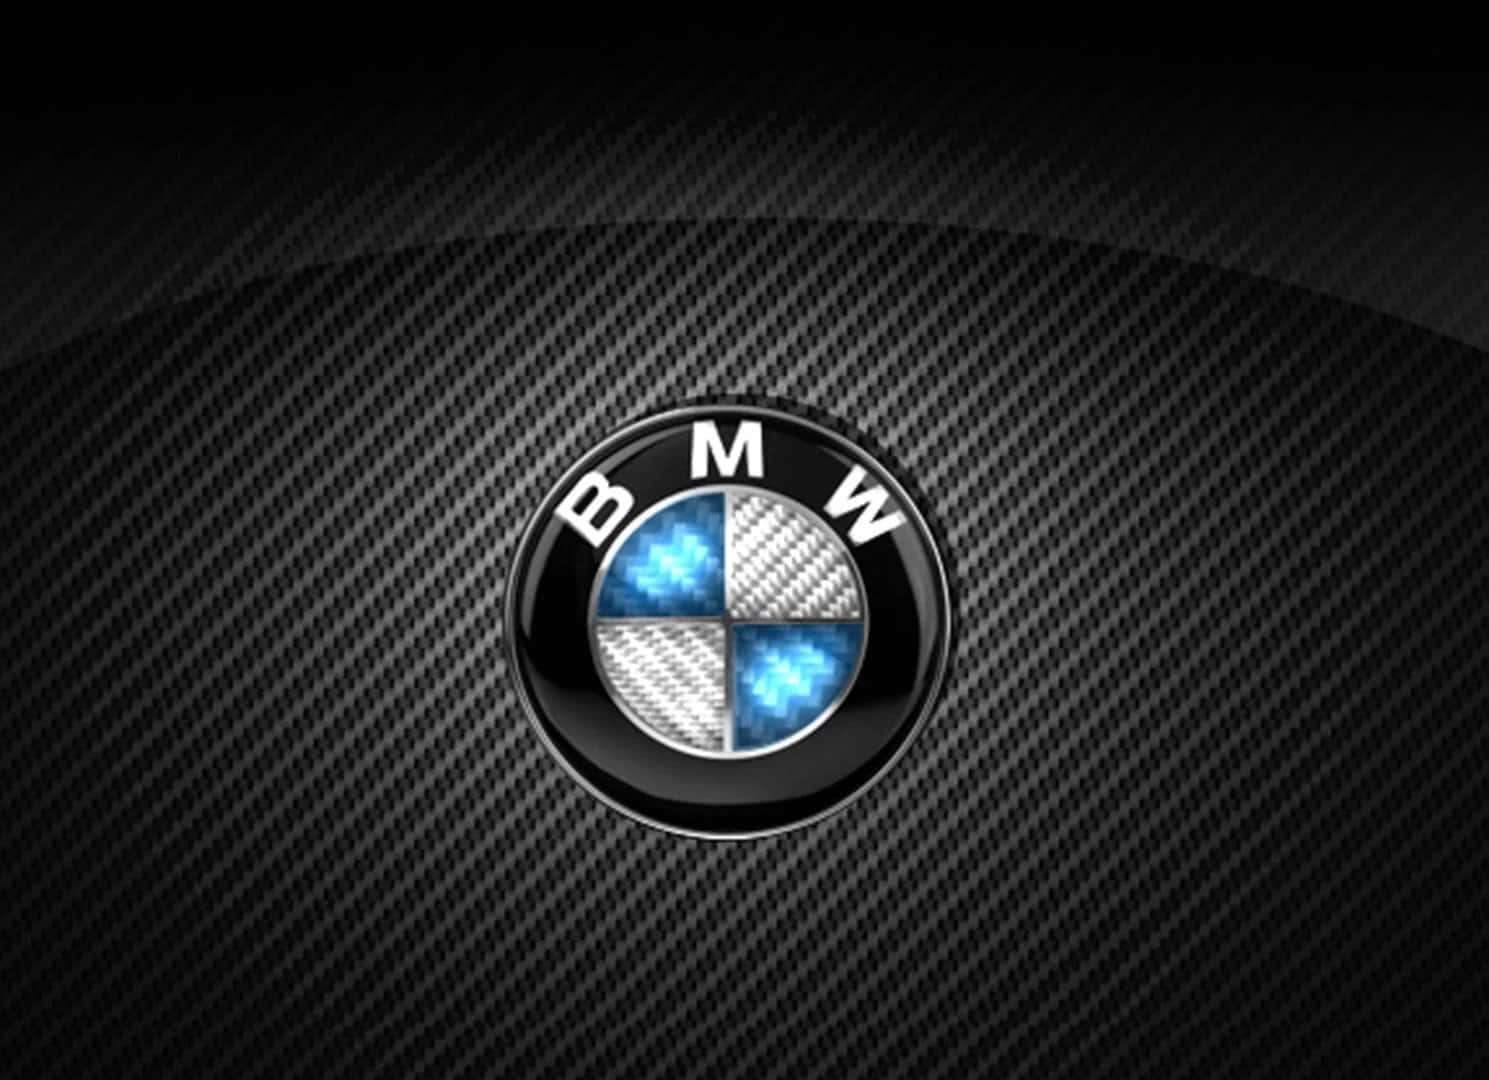 The iconic blue and white BMW Logo